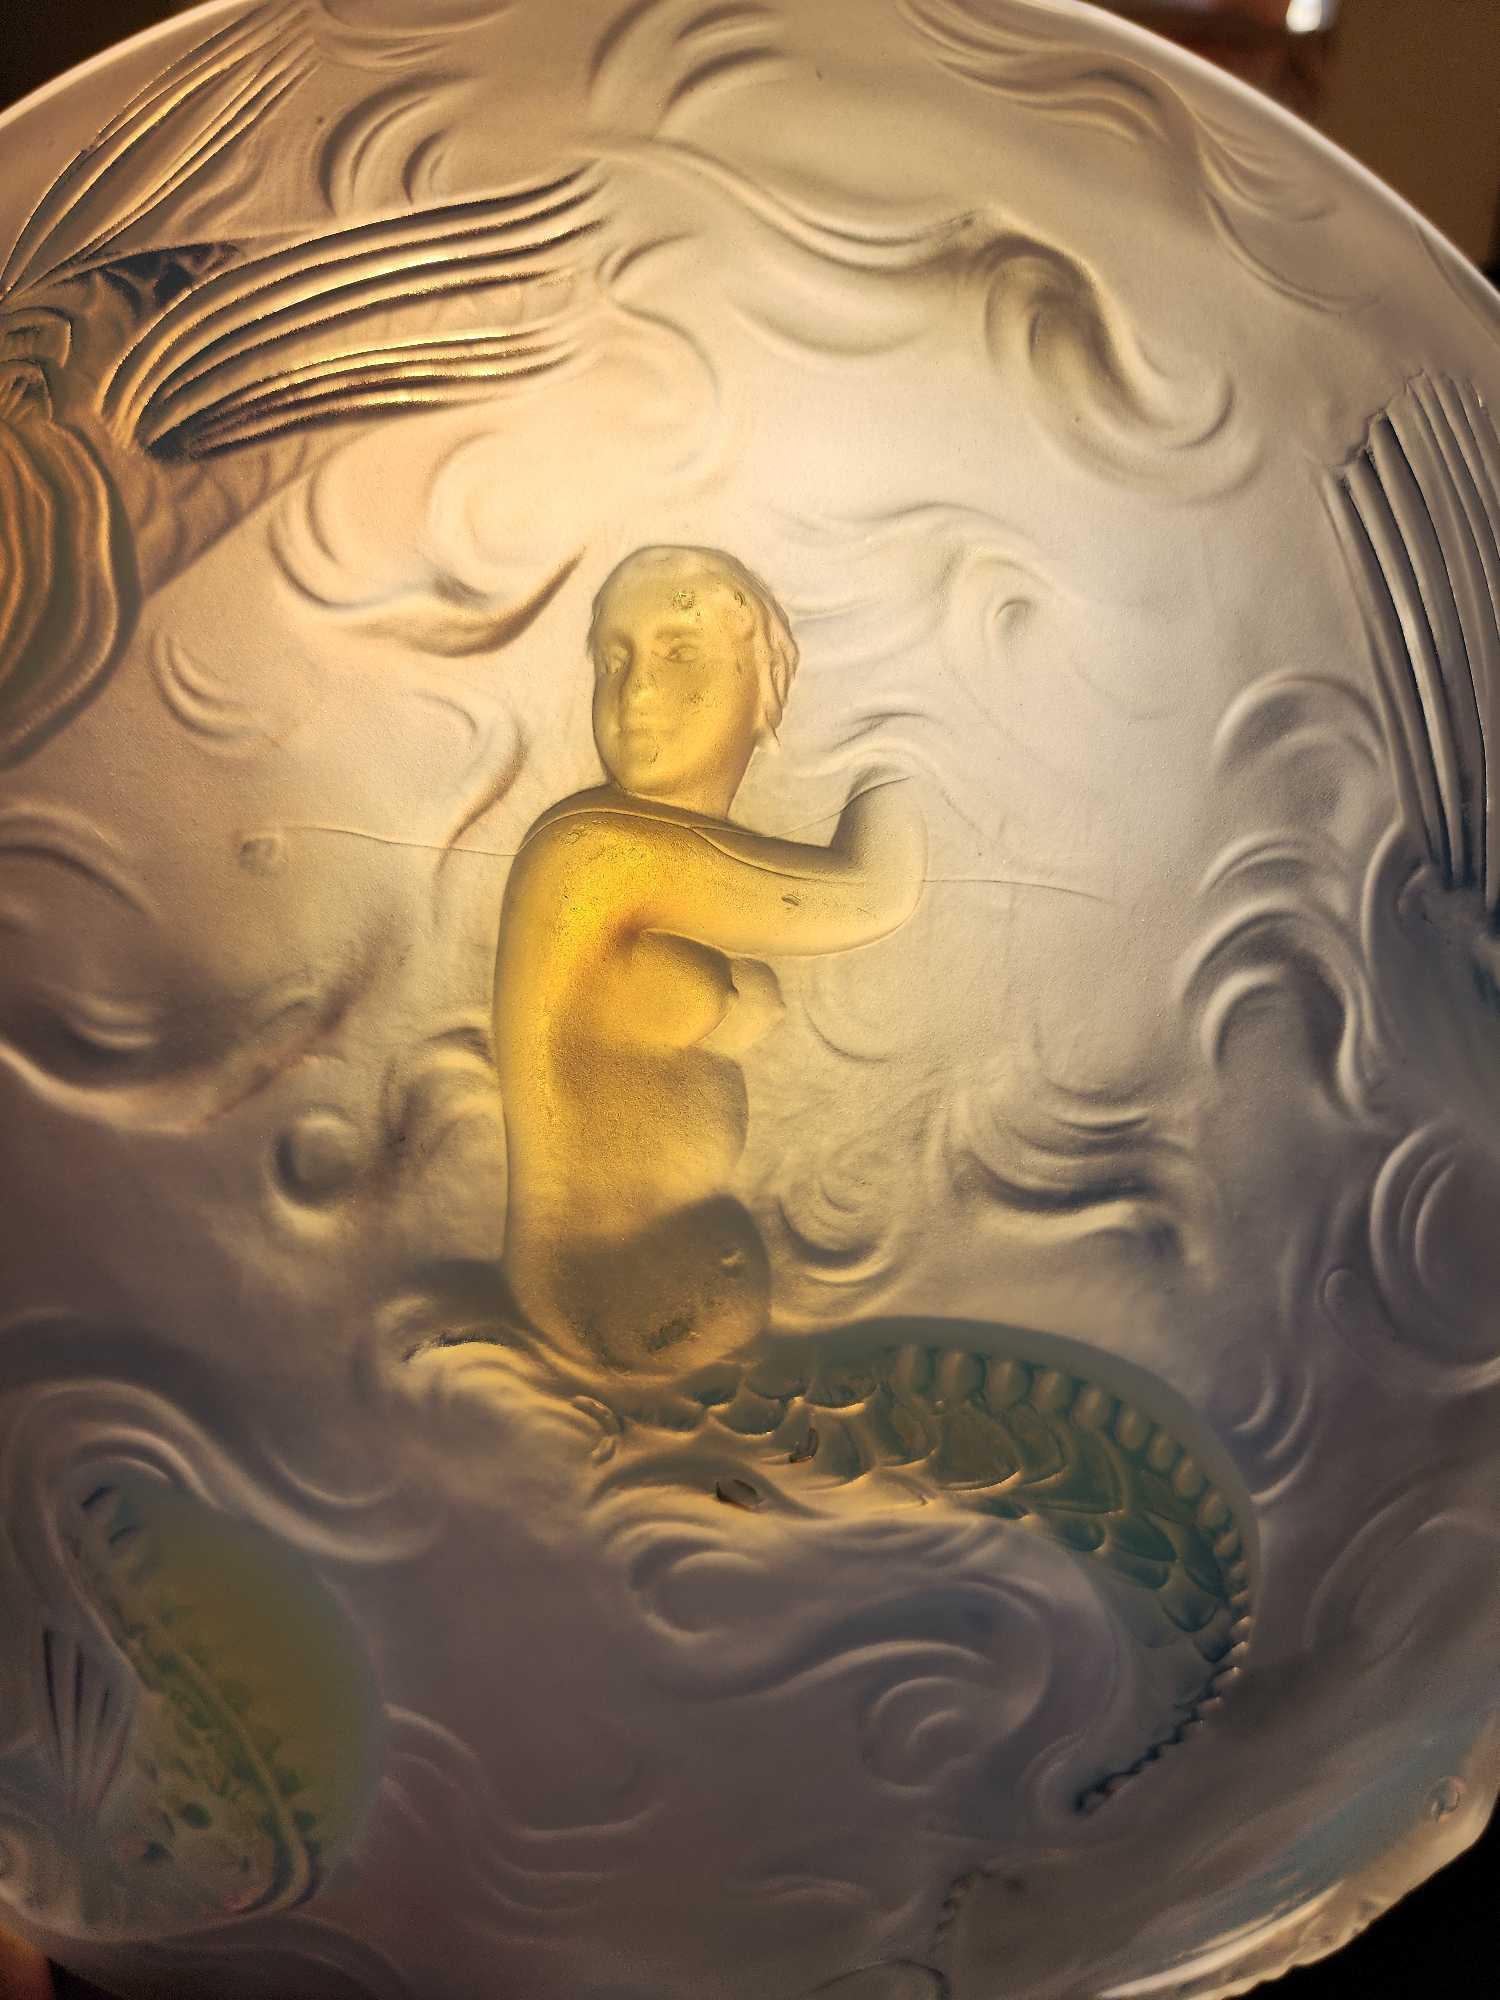 Huge 1930s vintage opalescent glass bowl with mermaid & fish